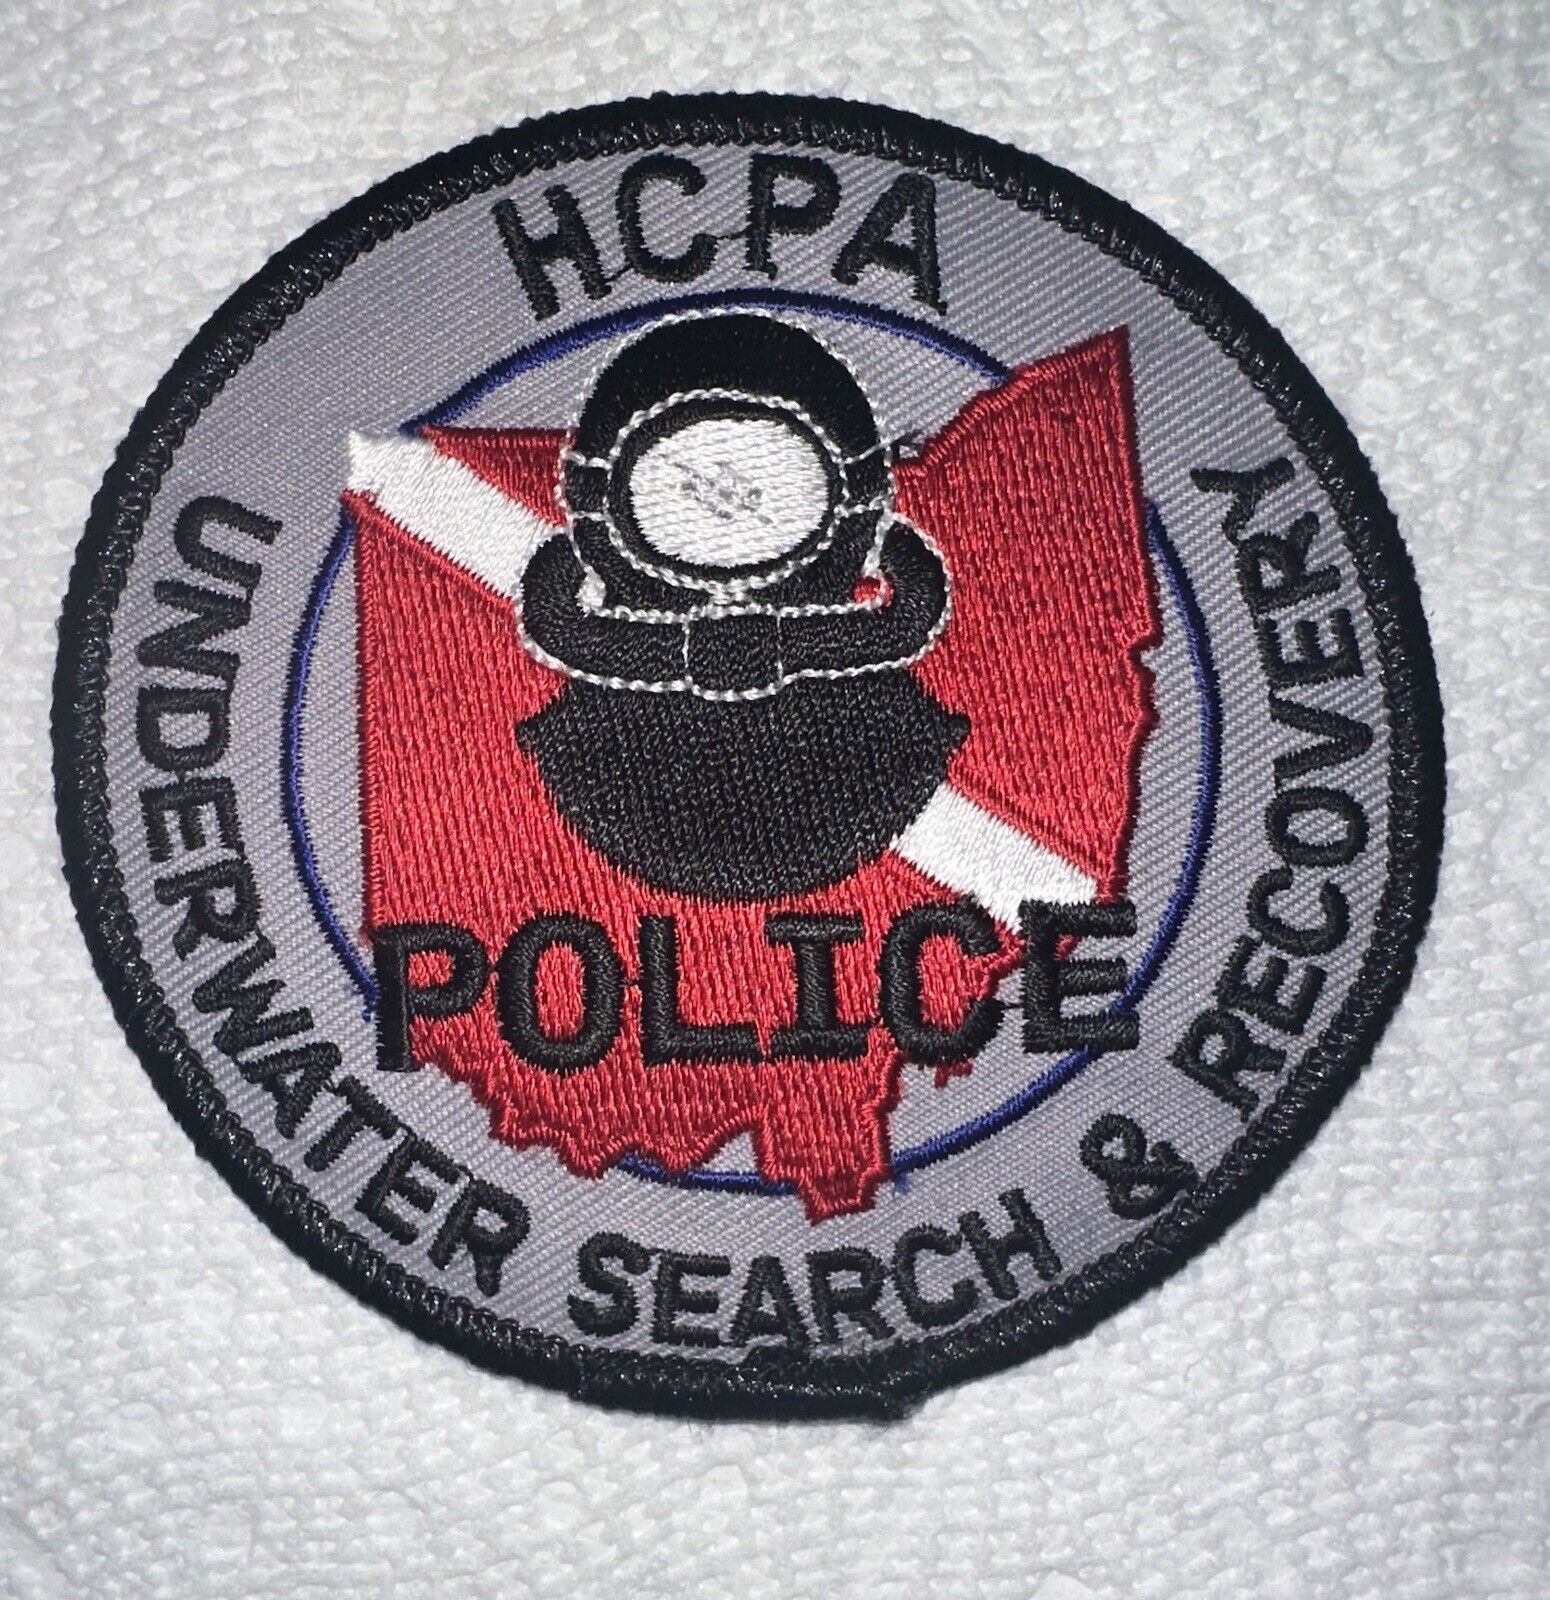 HCPA Underwater Search & Recovery patch